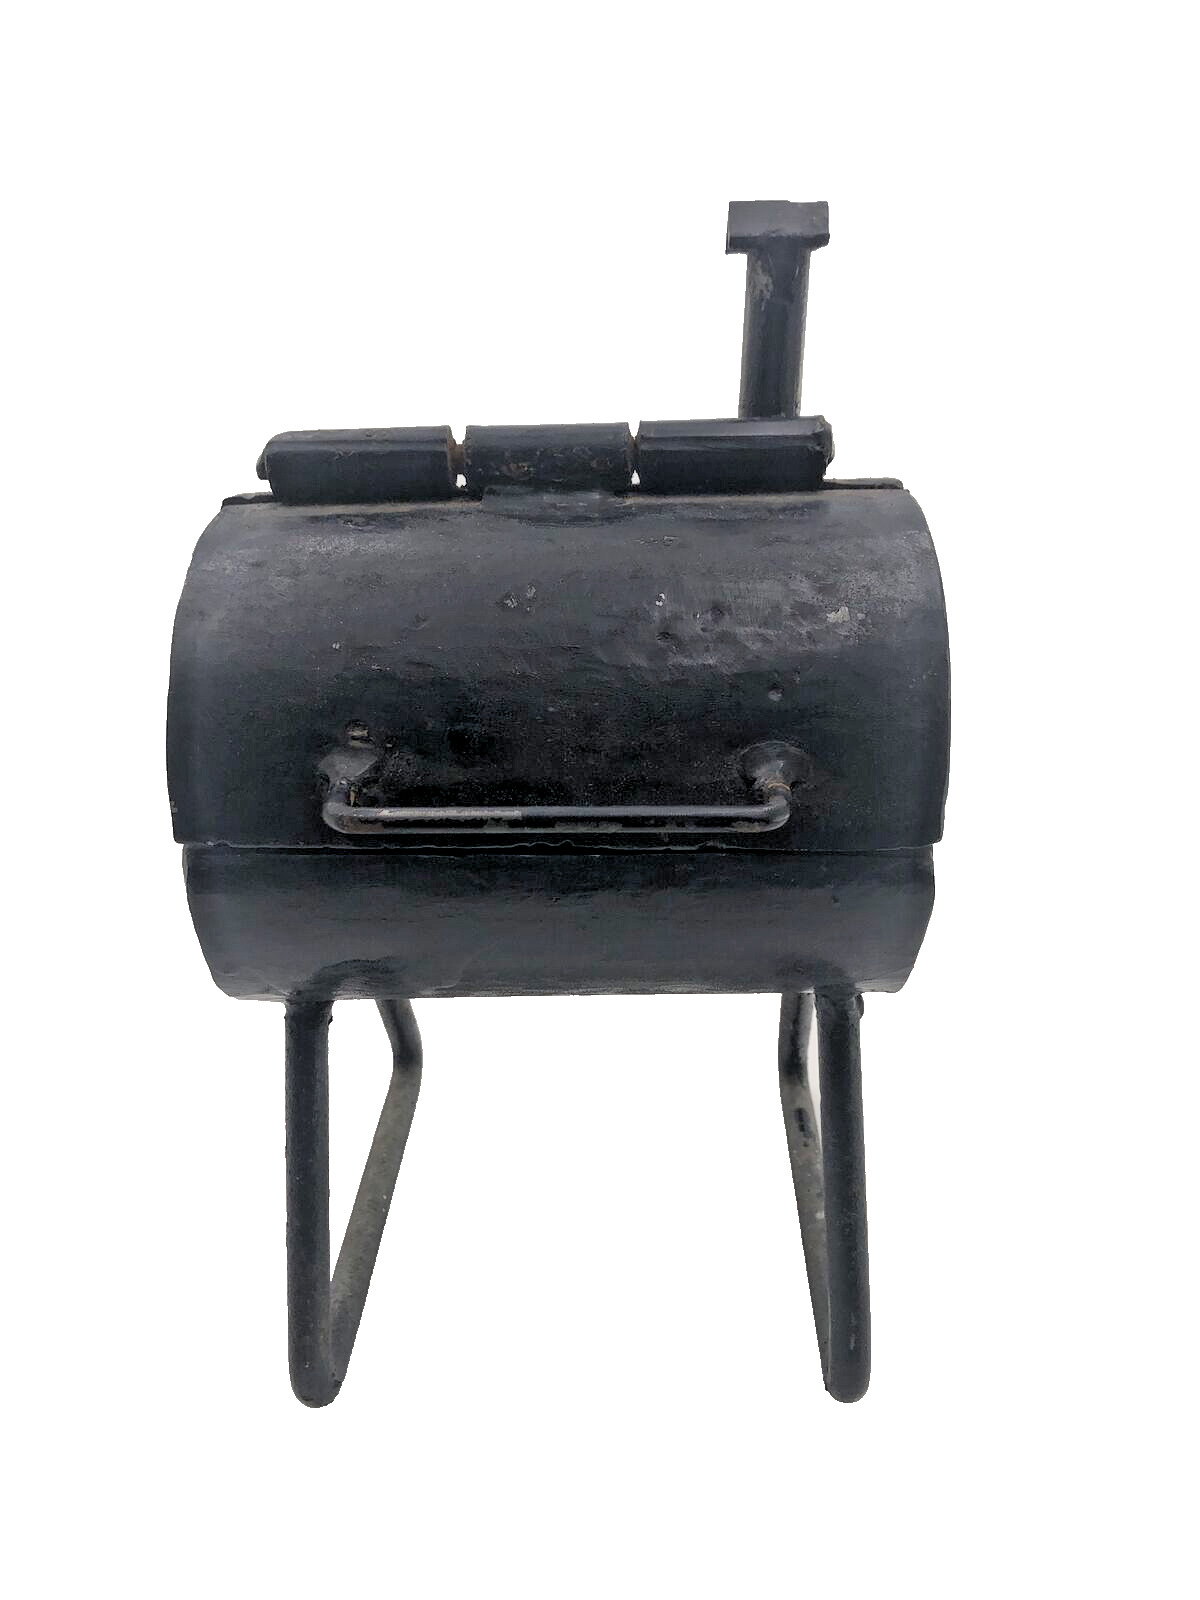 SMALL MINI CAST IRON TABLE TOP COAL BBQ FIRE PIT GRILL CAMPING STOVE Barbeque